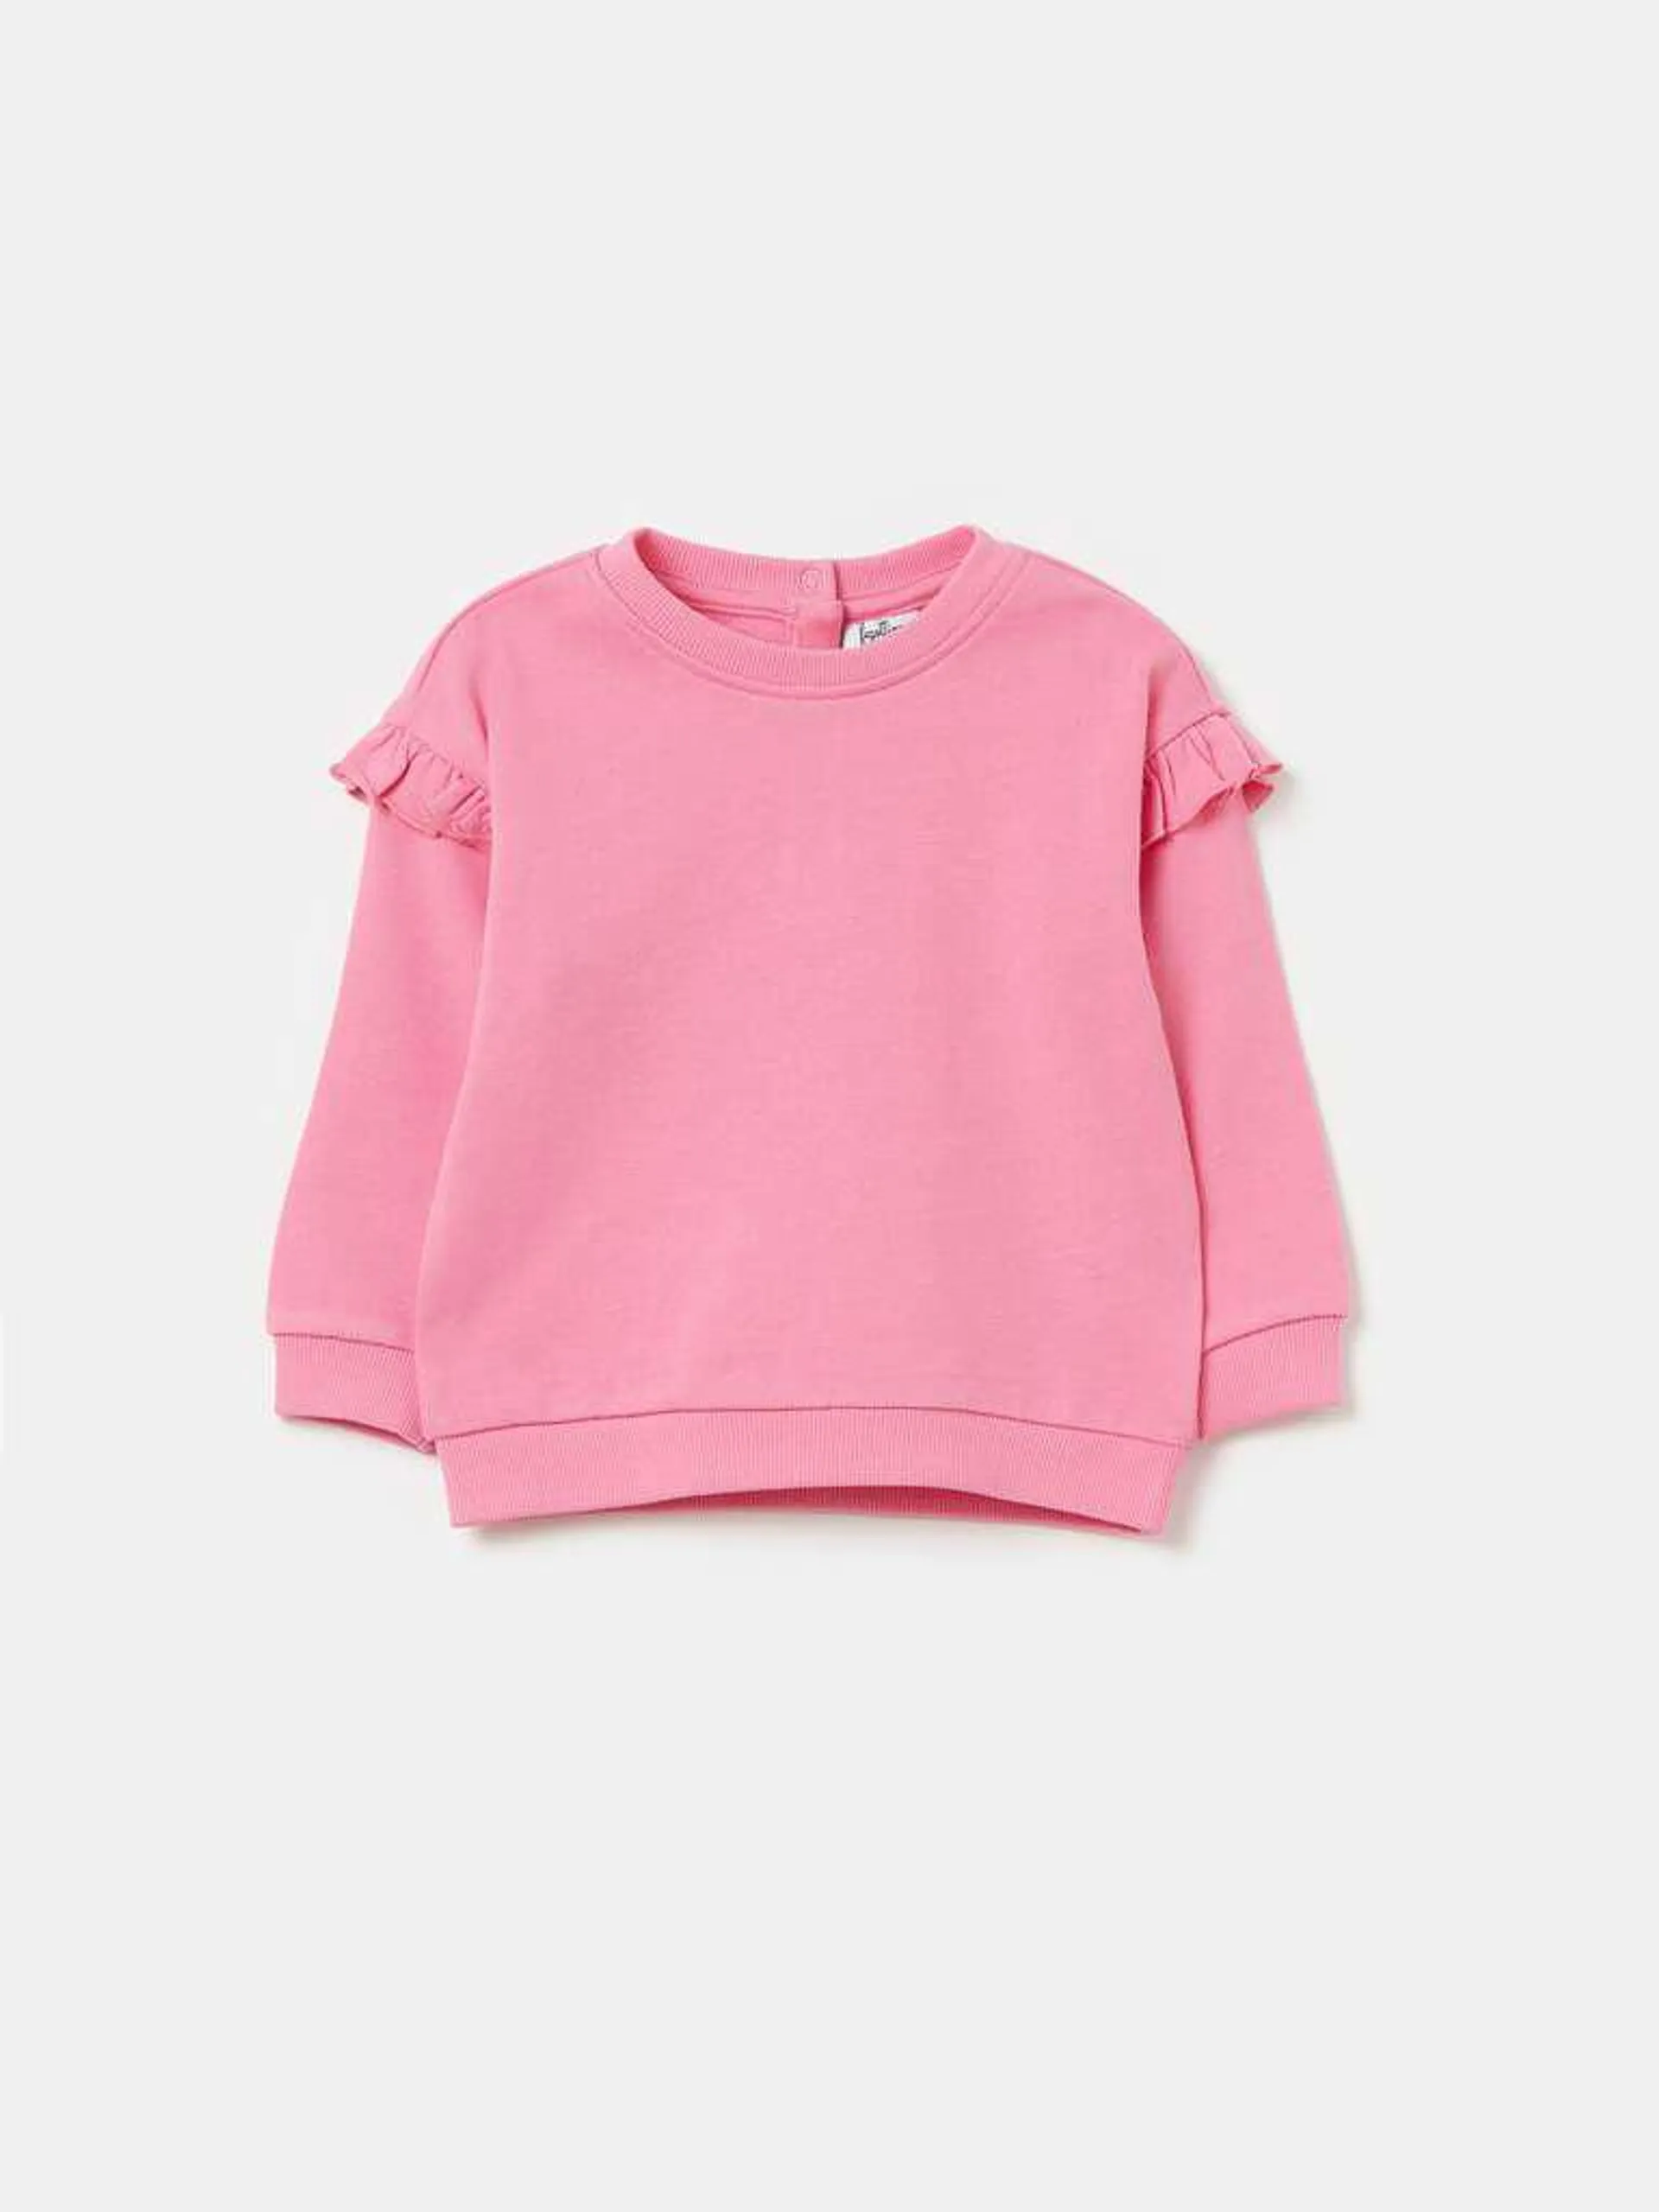 Sweatshirt in French terry with frills Rose pastel